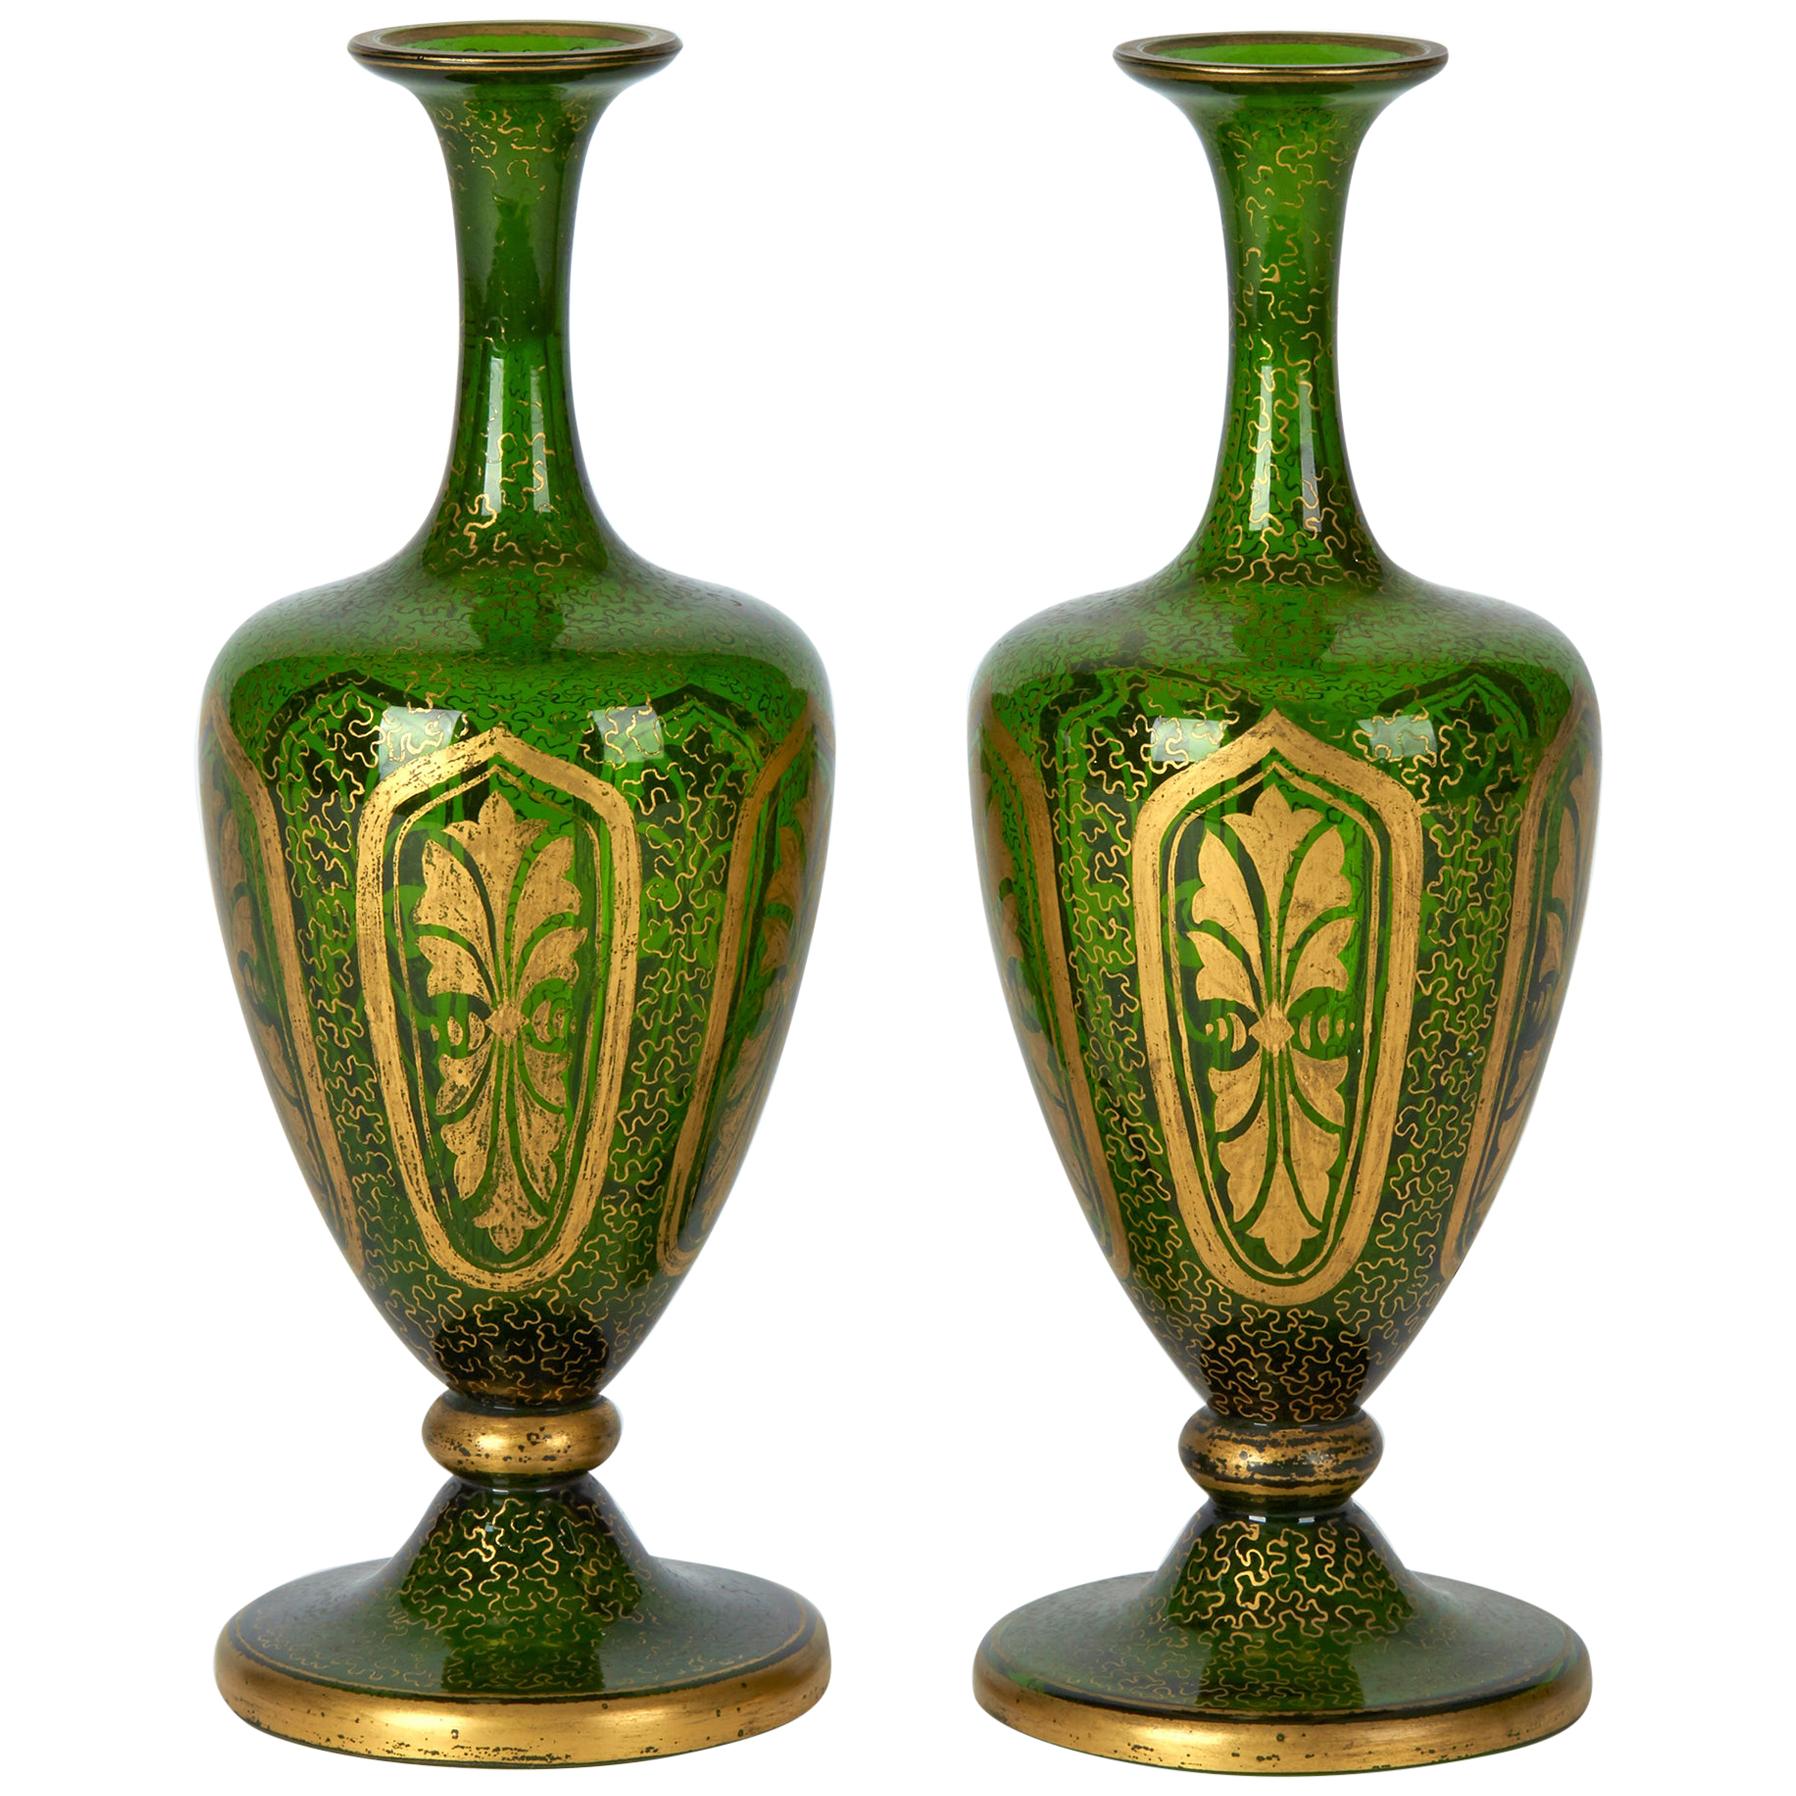 Pair of Antique Bohemian Gilded Green Glass Vases, 19th Century